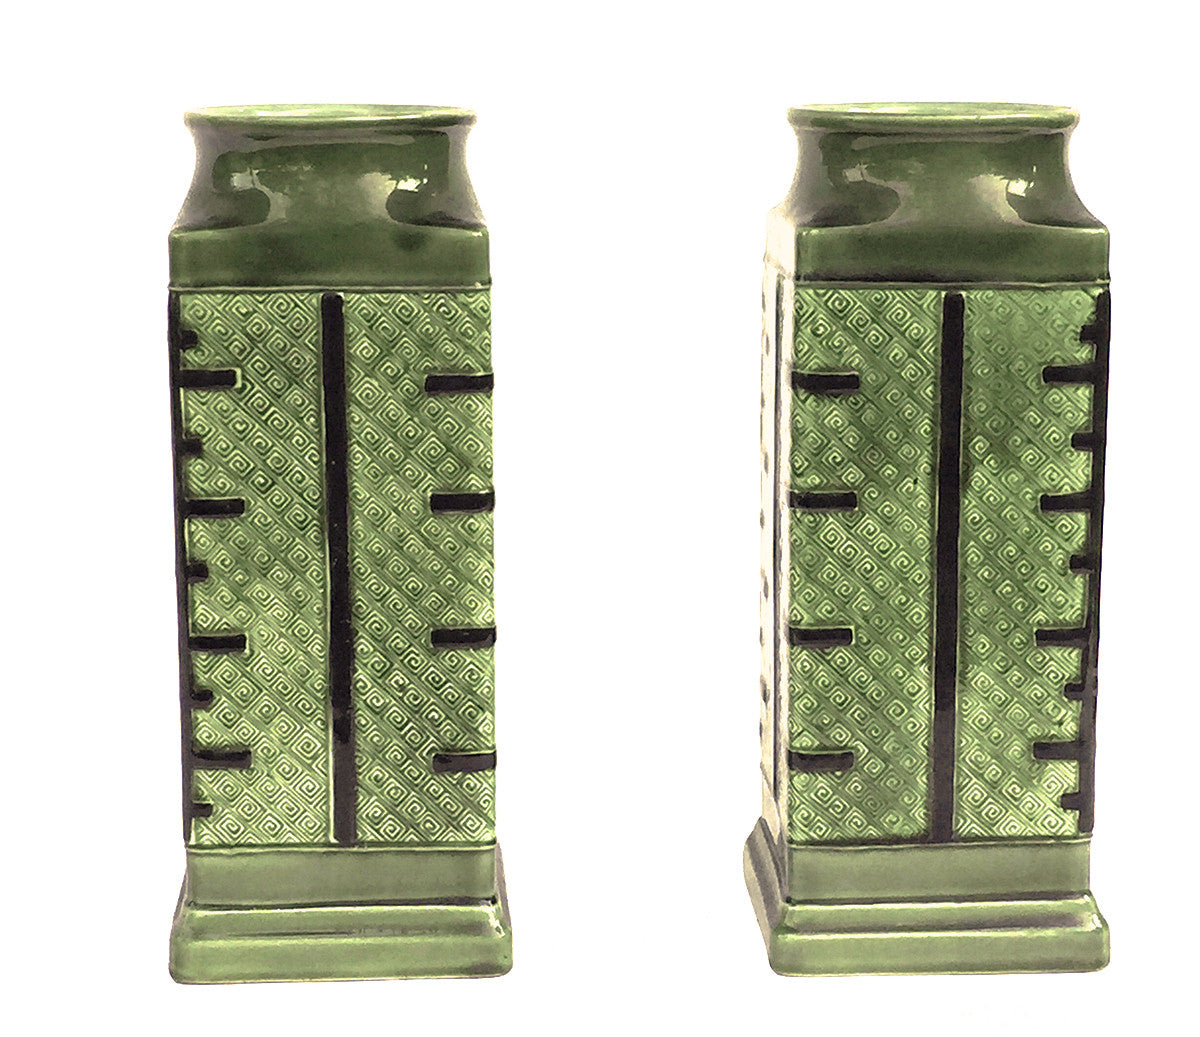 SOLD French (Choisy-le-Roi) Pair of Japonisme Faience Vases, circa 1885